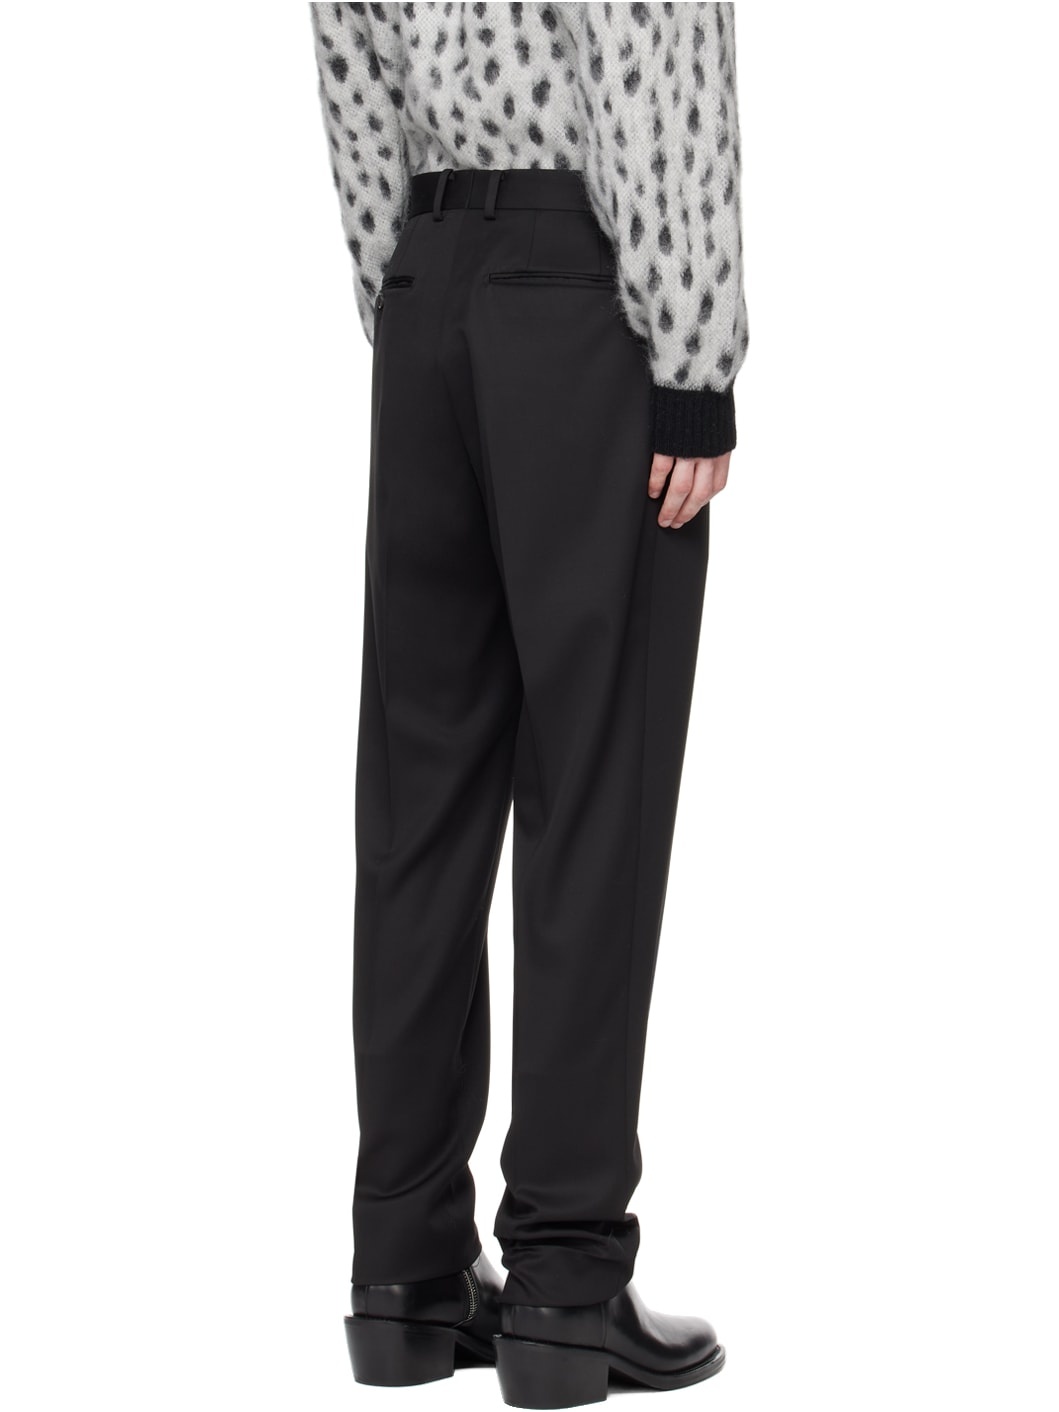 Black Type-2 Trousers - 3